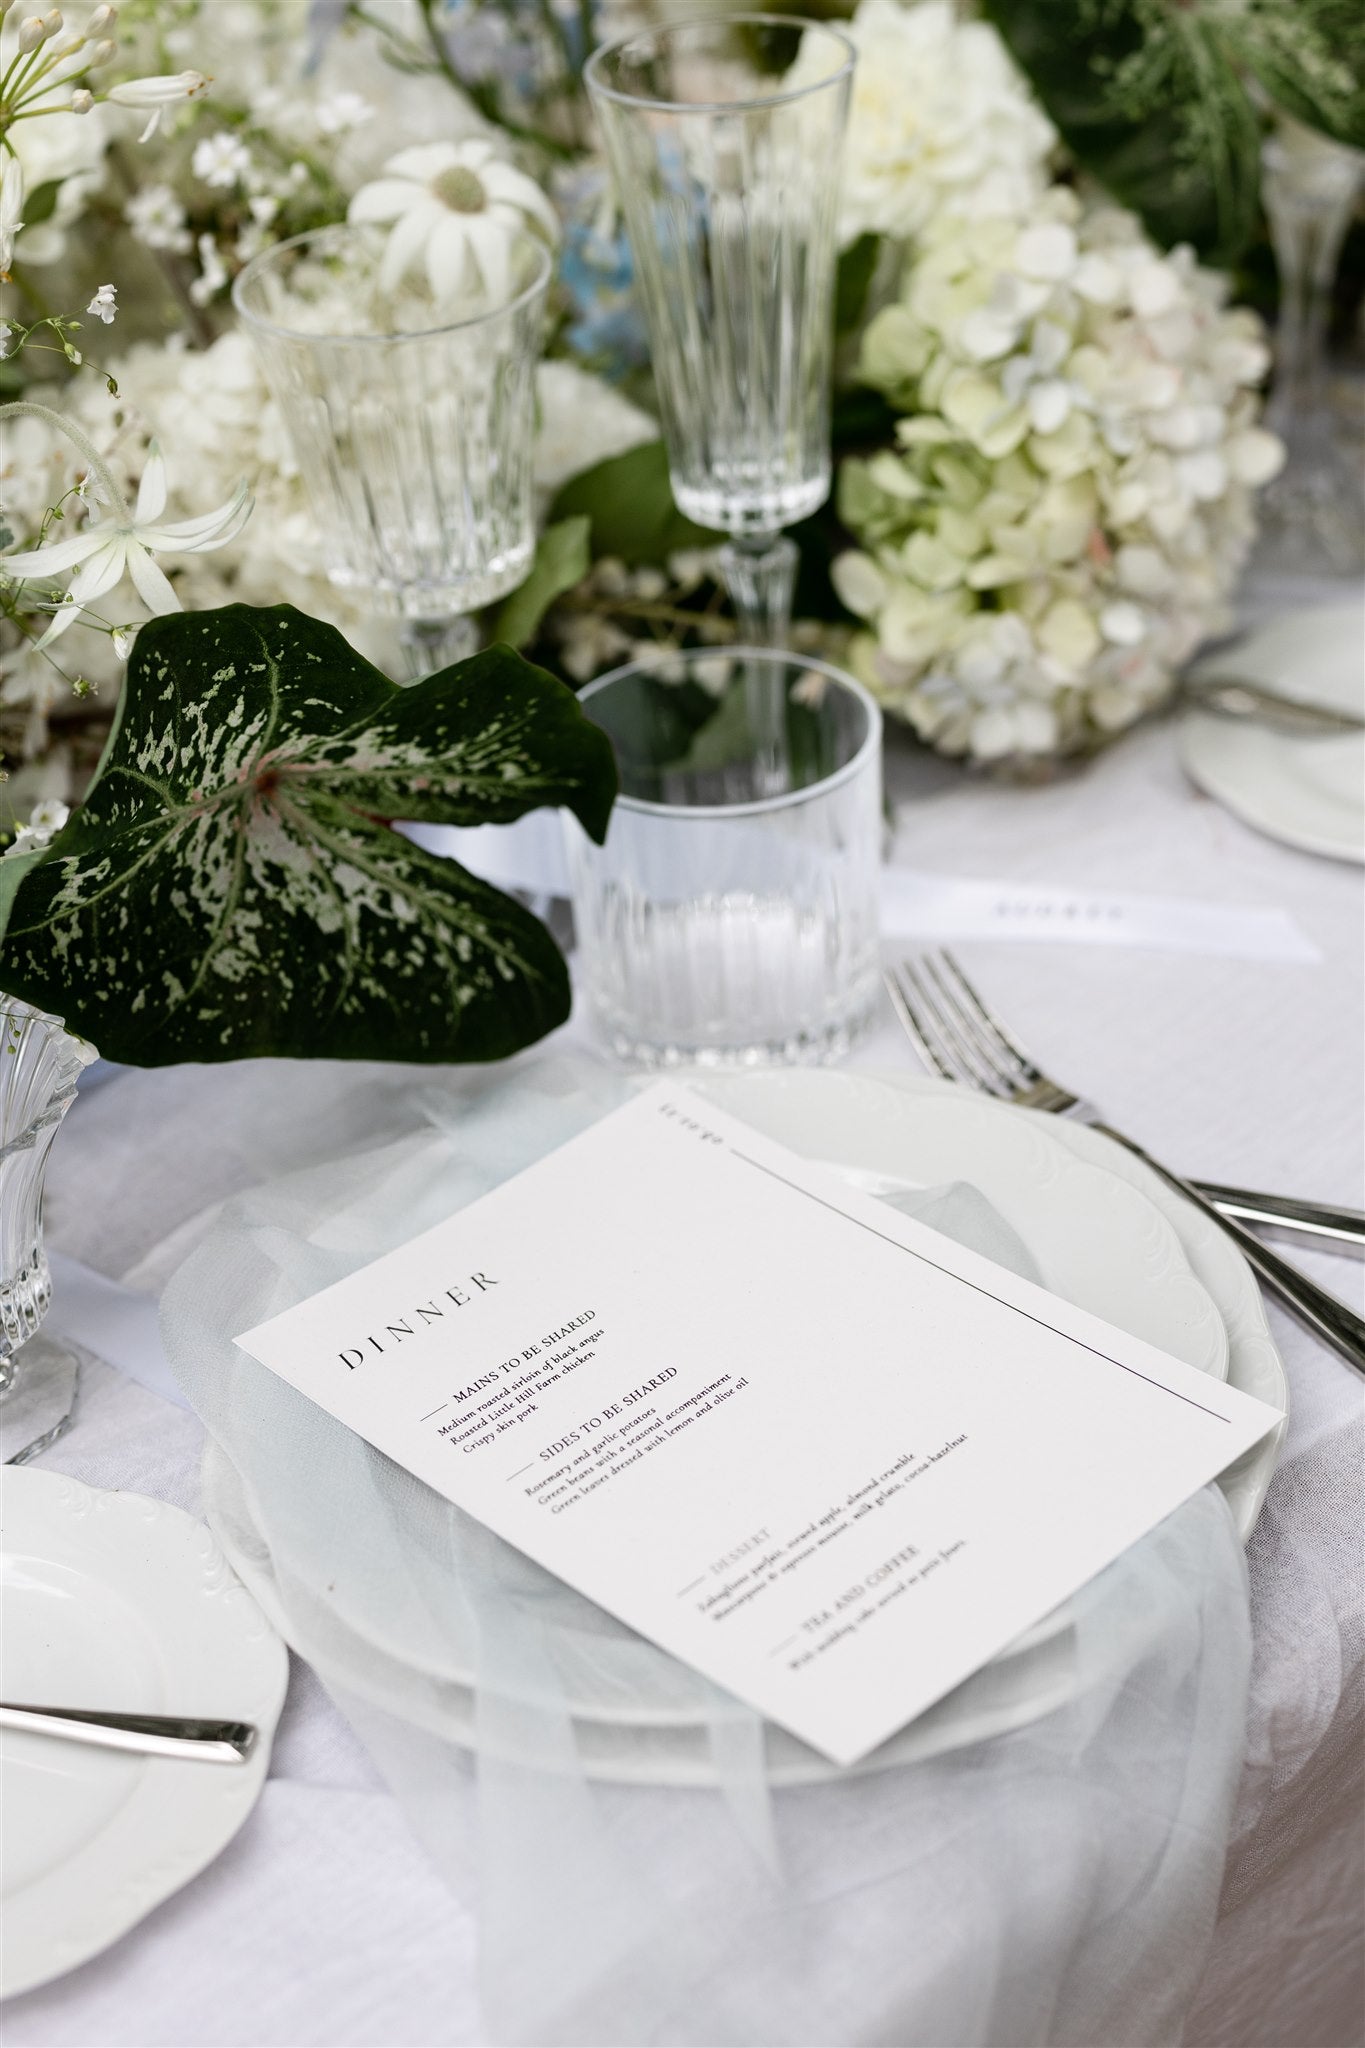 Silk napkins - powdery blue - available for hire.| Gold Coast Wedding & Event Hire